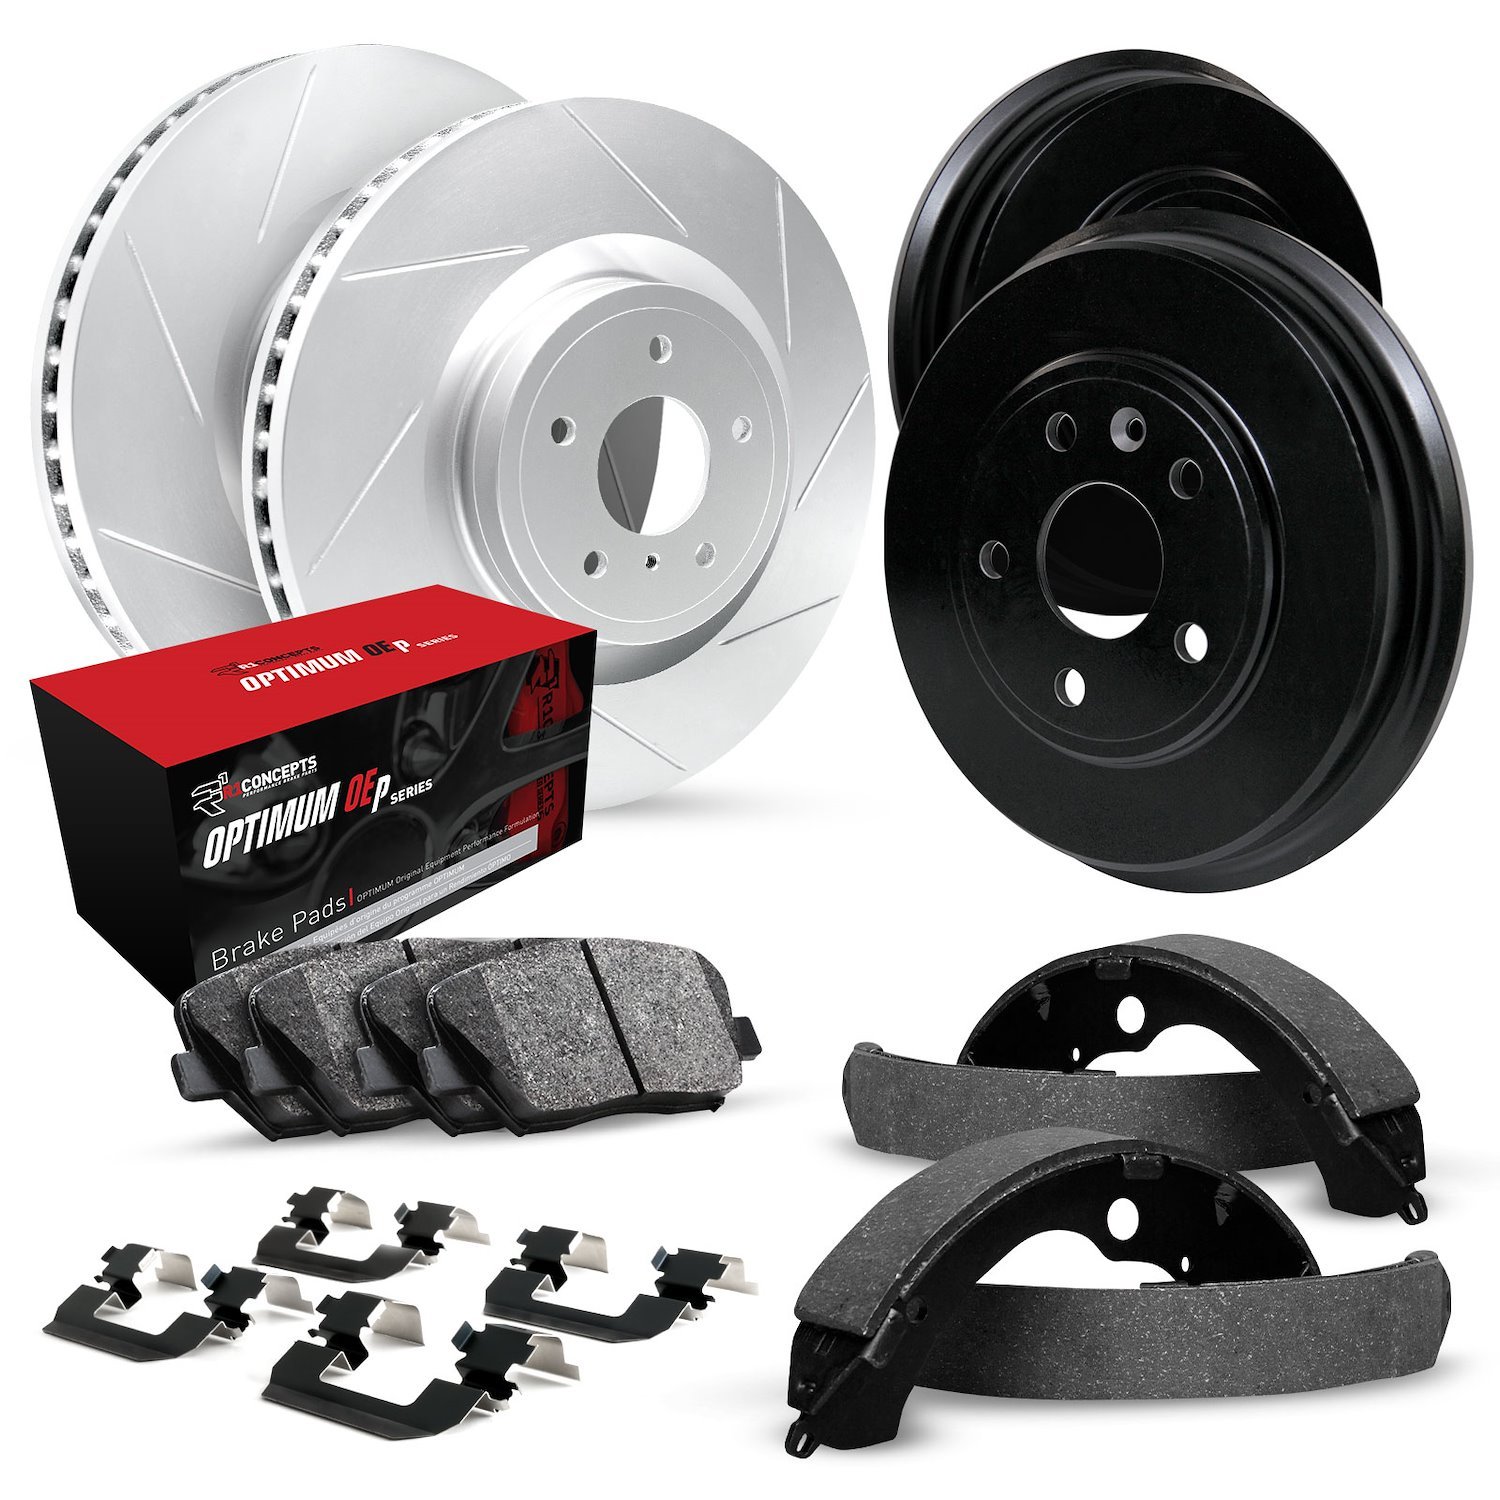 GEO-Carbon Slotted Brake Rotor & Drum Set w/Optimum OE Pads, Shoes, & Hardware, 1966-1966 Ford/Lincoln/Mercury/Mazda